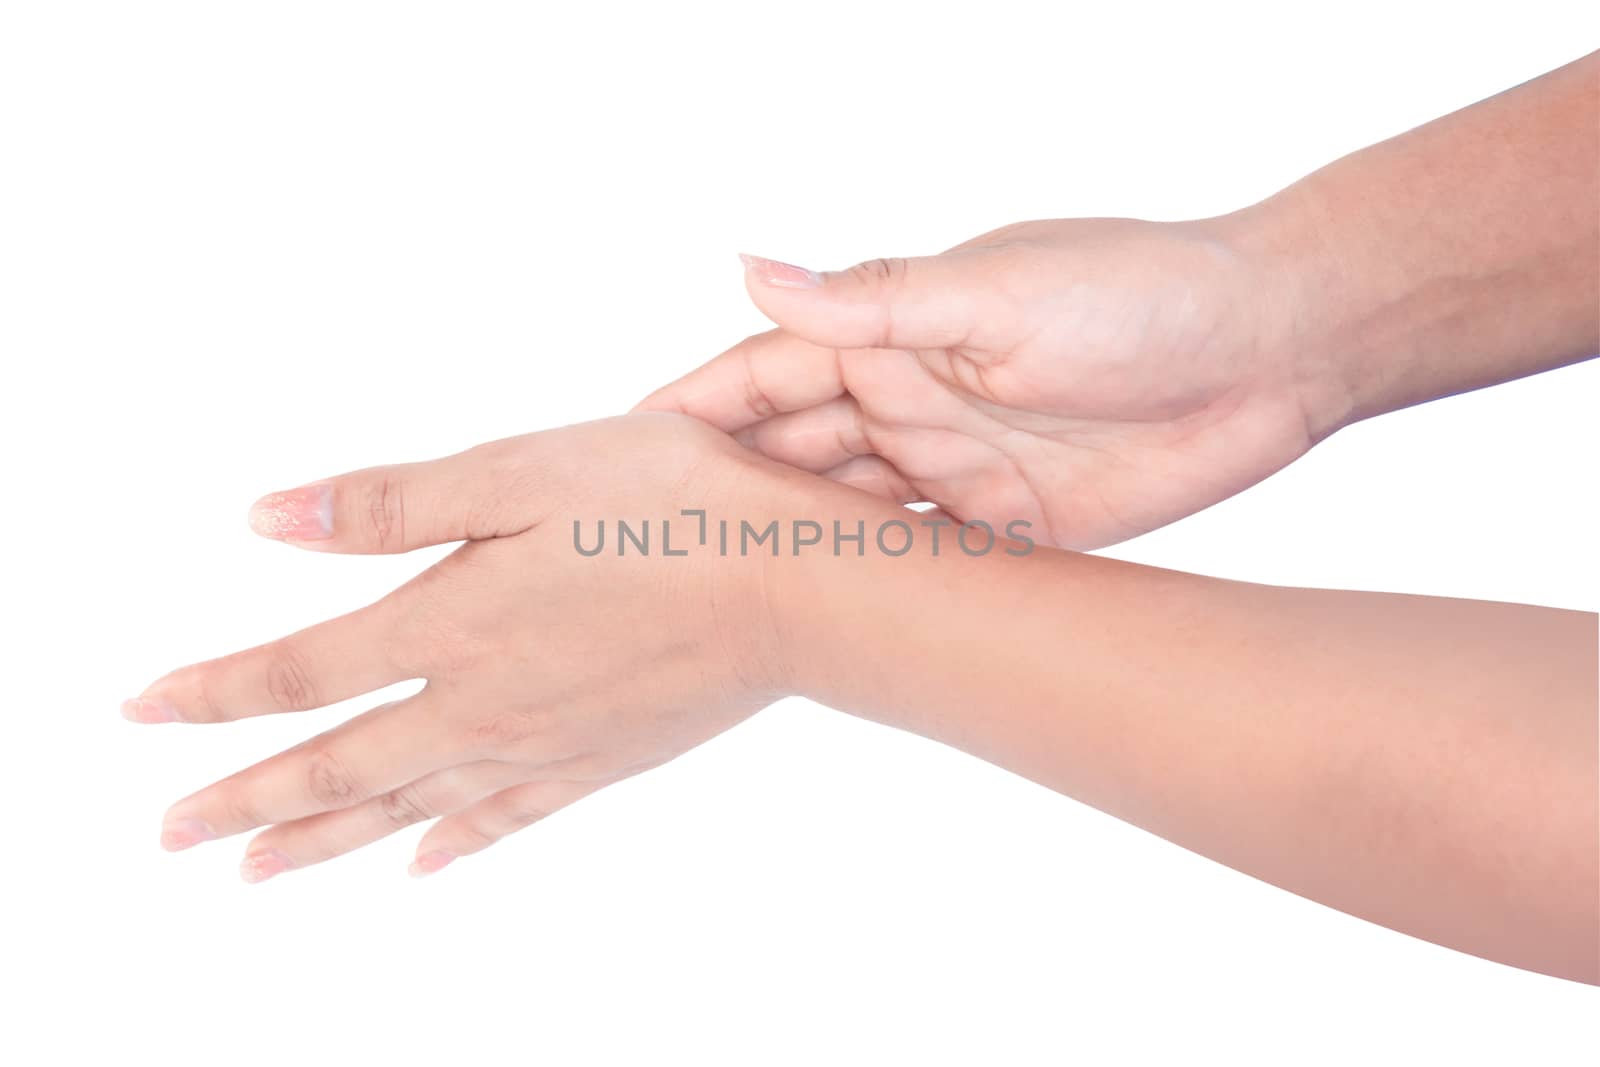 Closeup woman's hand washing with soap on white background, heal by pt.pongsak@gmail.com